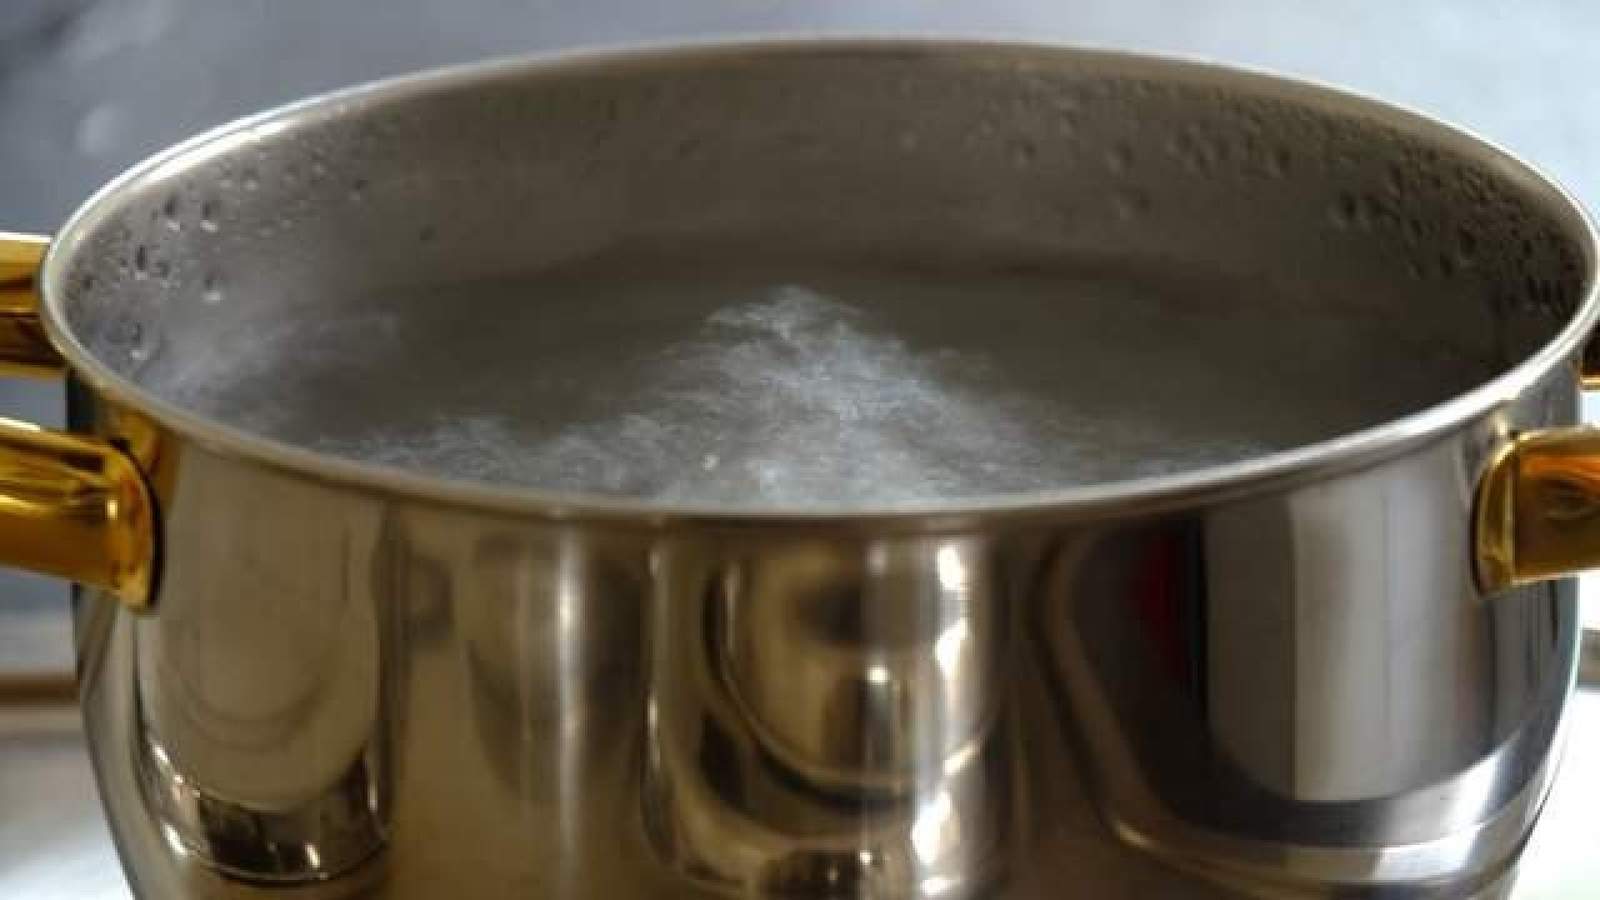 Portion of Westland remains under boil water advisory